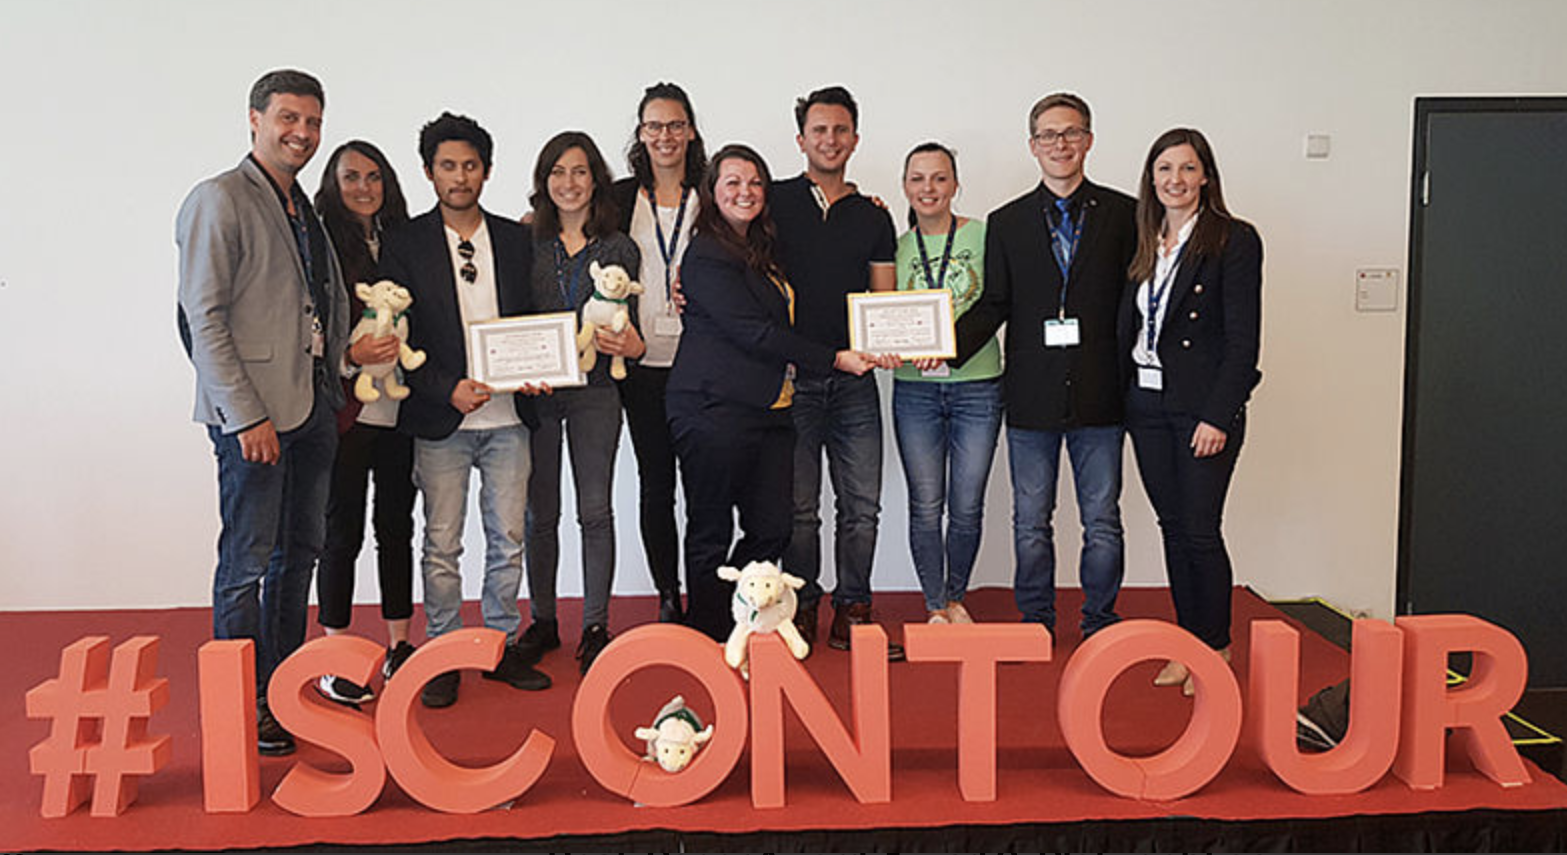 FH Salzburg students present eTourism research at ISCONTOUR 2019 Conference and win Best Paper Awards